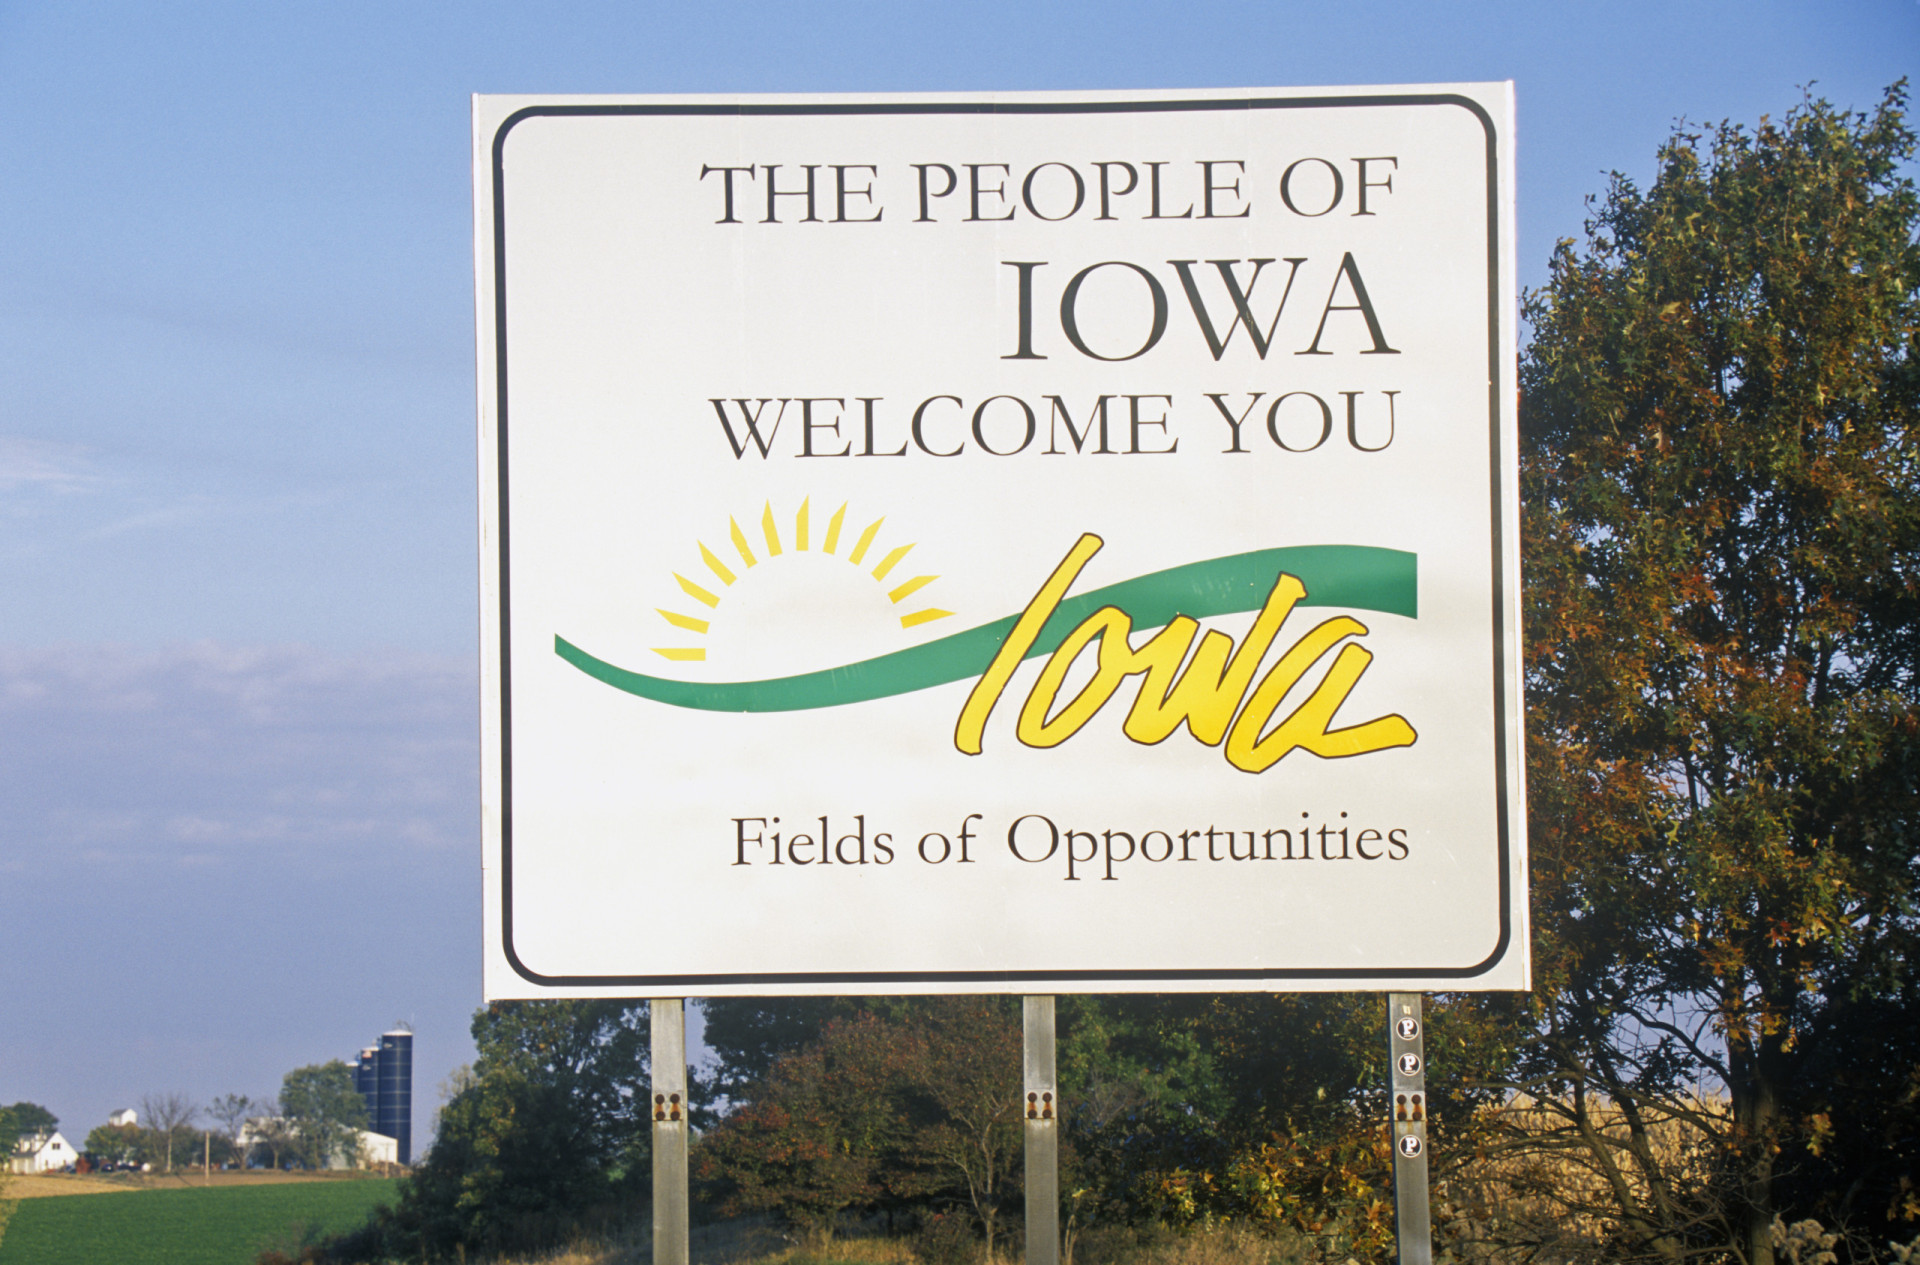 <p>The state slogan was launched in 1999 but as of 2023 it's being phased out and replaced with a new 'Iowa, Freedom to Flourish' sign. </p><p><a href="https://www.msn.com/en-us/community/channel/vid-7xx8mnucu55yw63we9va2gwr7uihbxwc68fxqp25x6tg4ftibpra?cvid=94631541bc0f4f89bfd59158d696ad7e">Follow us and access great exclusive content every day</a></p>